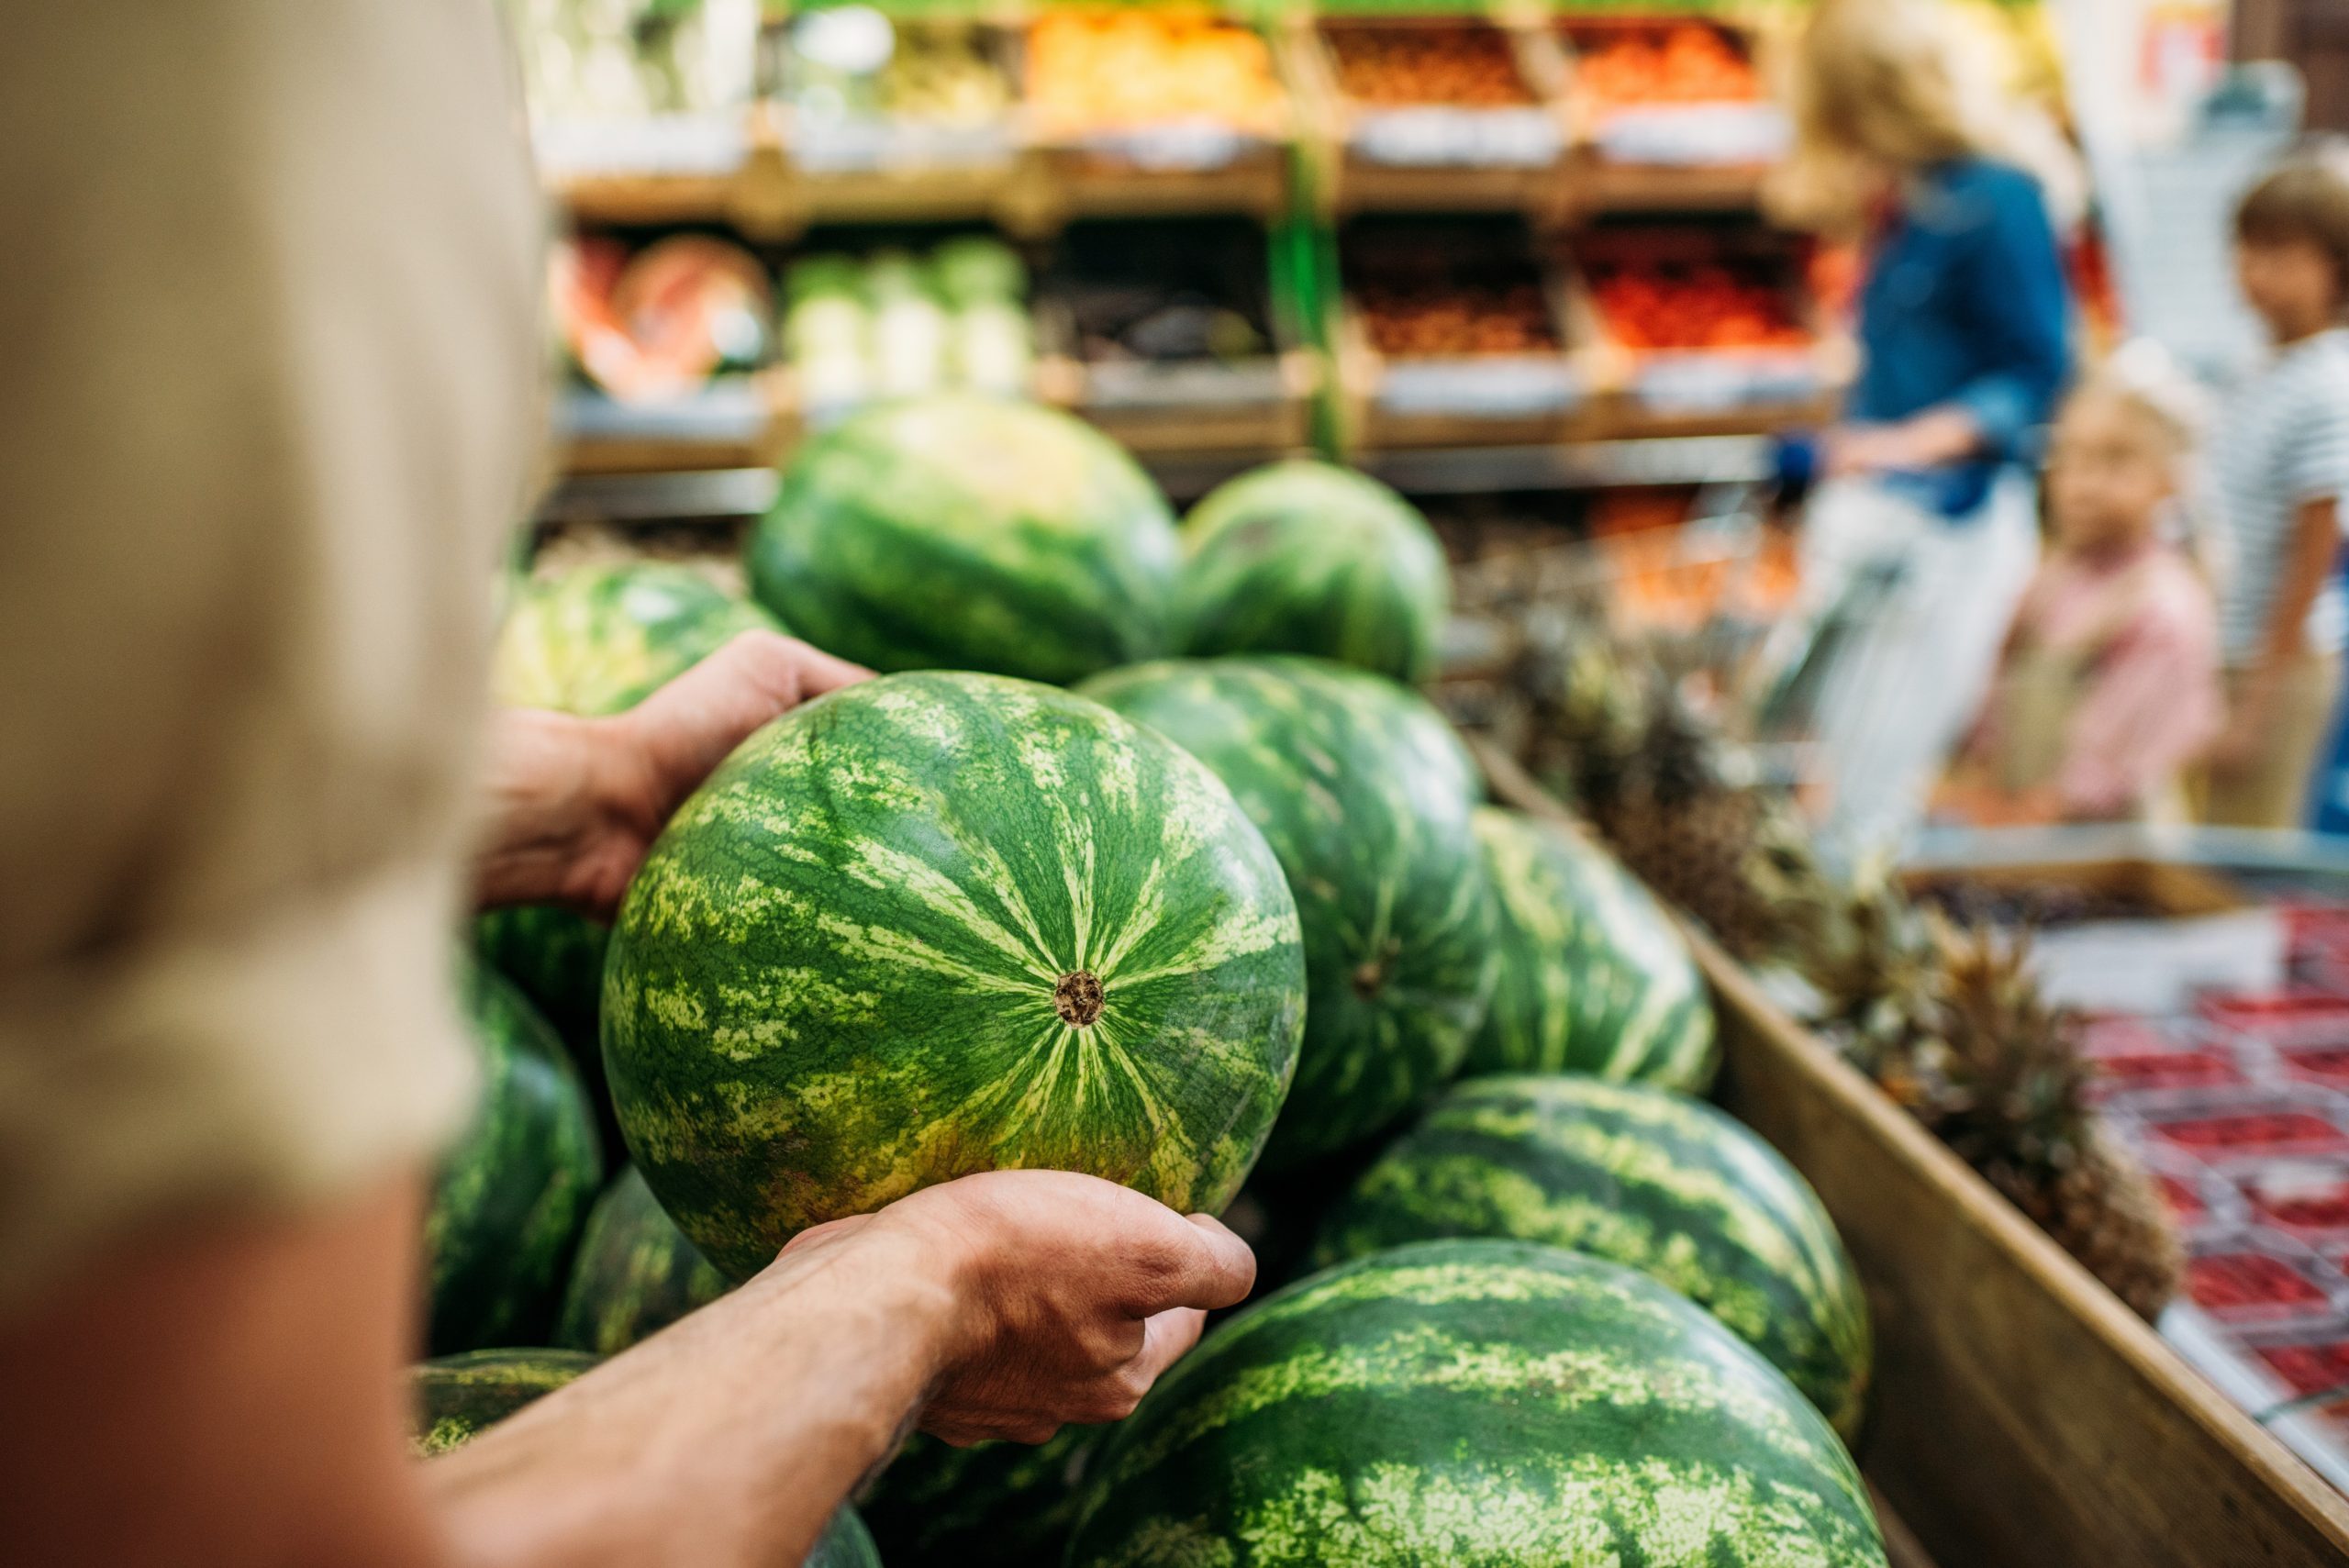 https://www.rd.com/wp-content/uploads/2019/06/watermelon-grocery-scaled.jpg